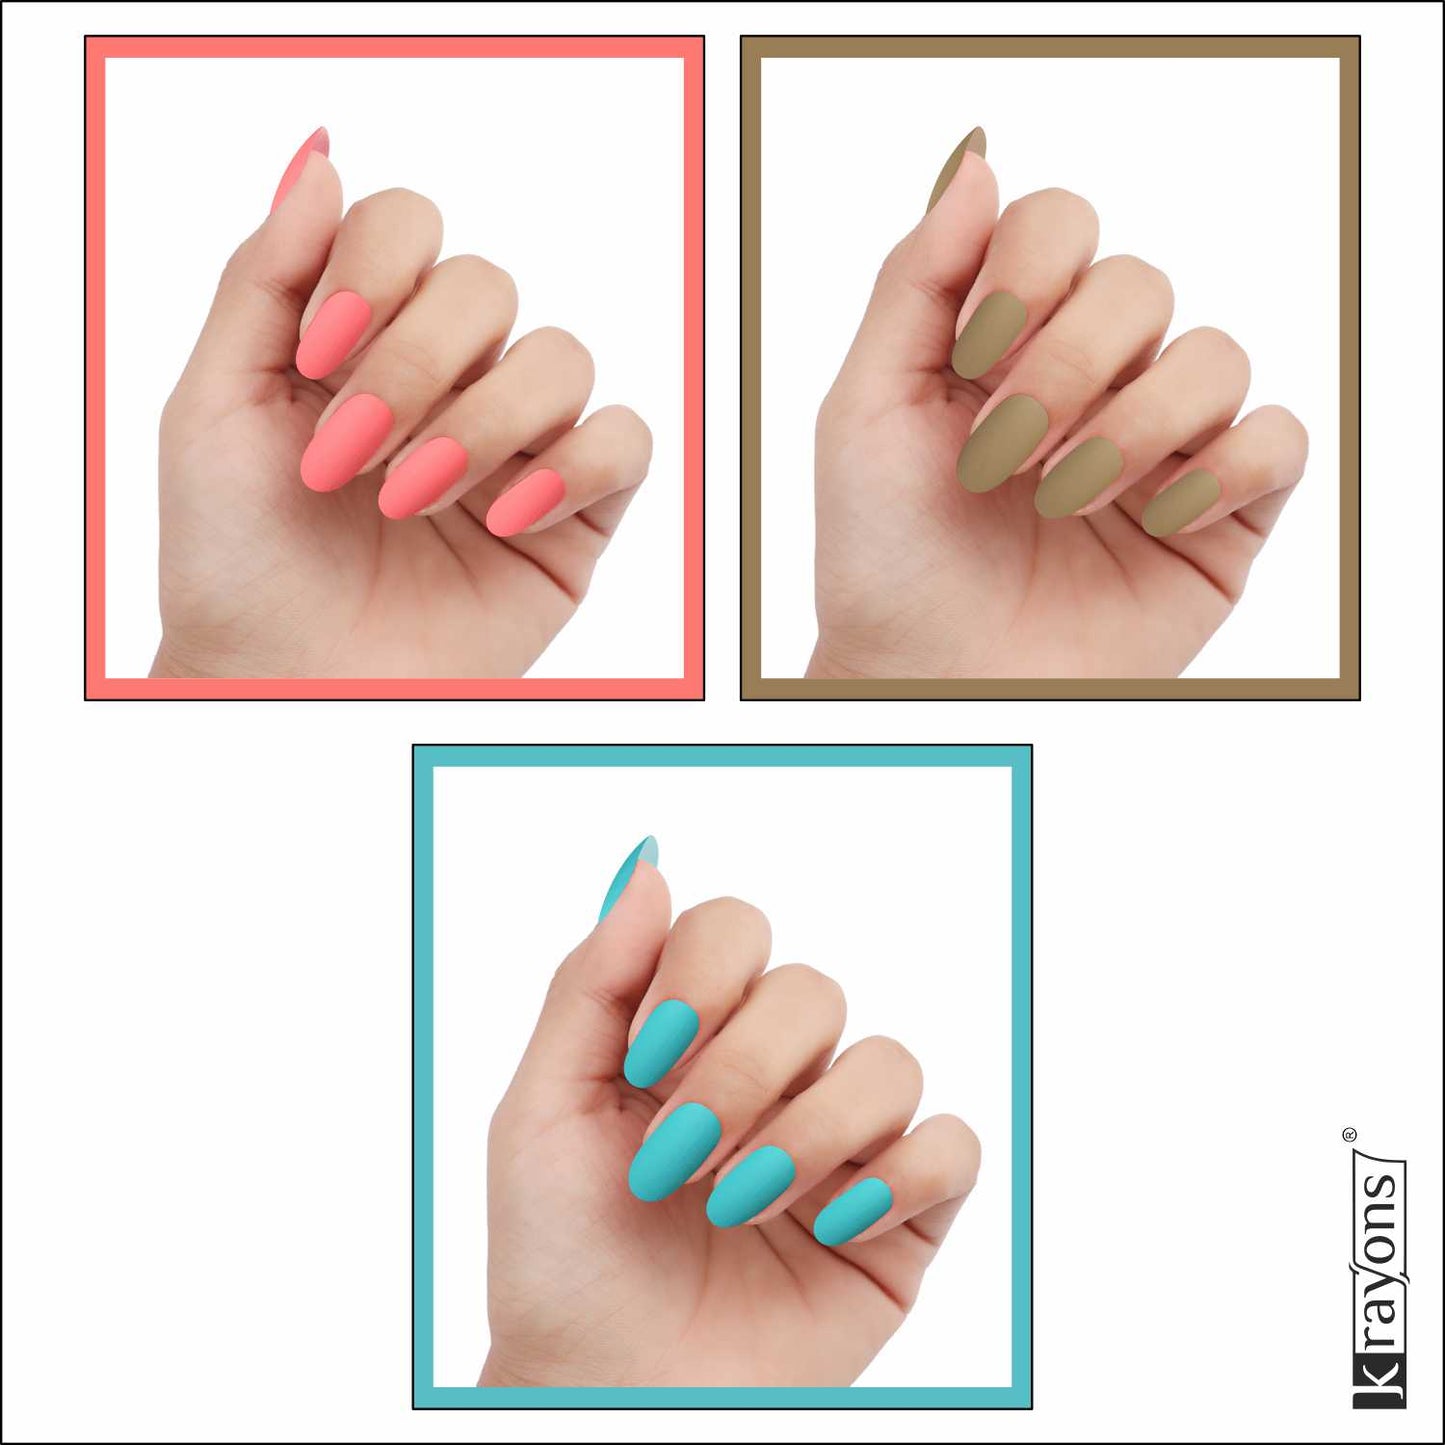 Krayons Cute Super Matte Finish Nail Enamel, Quick Dry, LongLasting, Blossom Peach, Nude Beige, Cyan Matte, 6ml Each (Pack of 3)